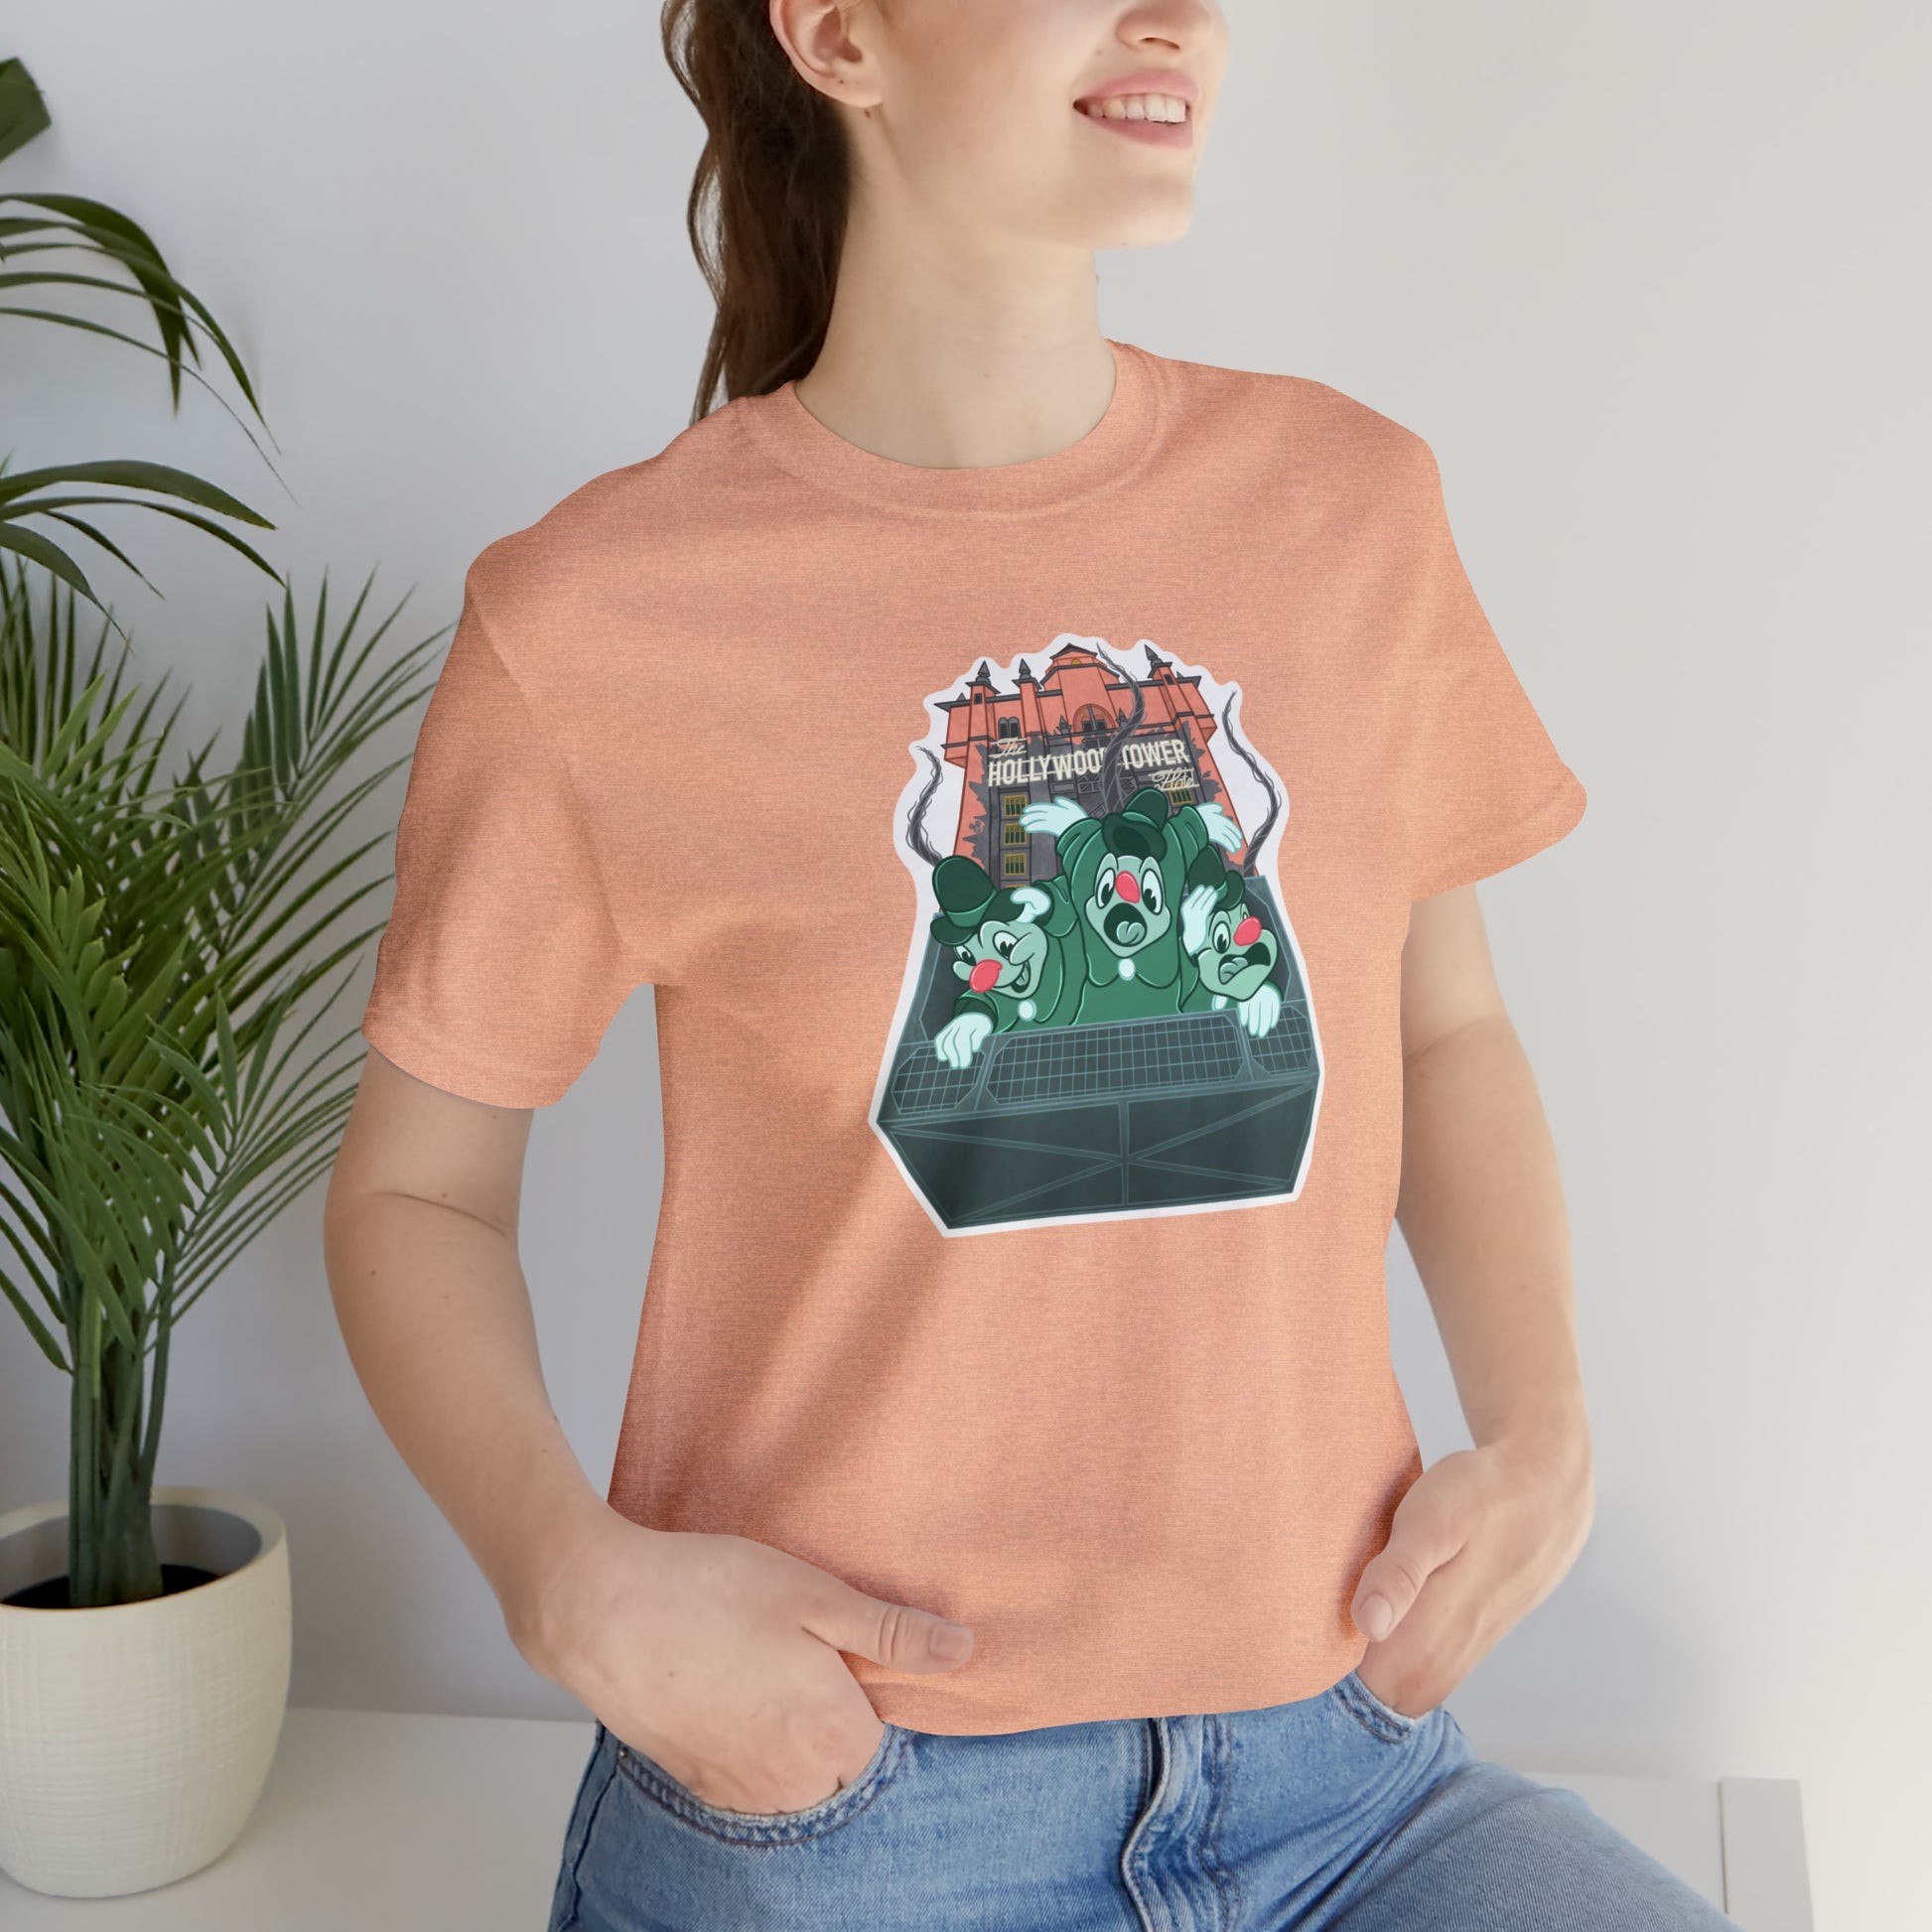 Lifestyle Peach Lonesome Ghosts Shirt 